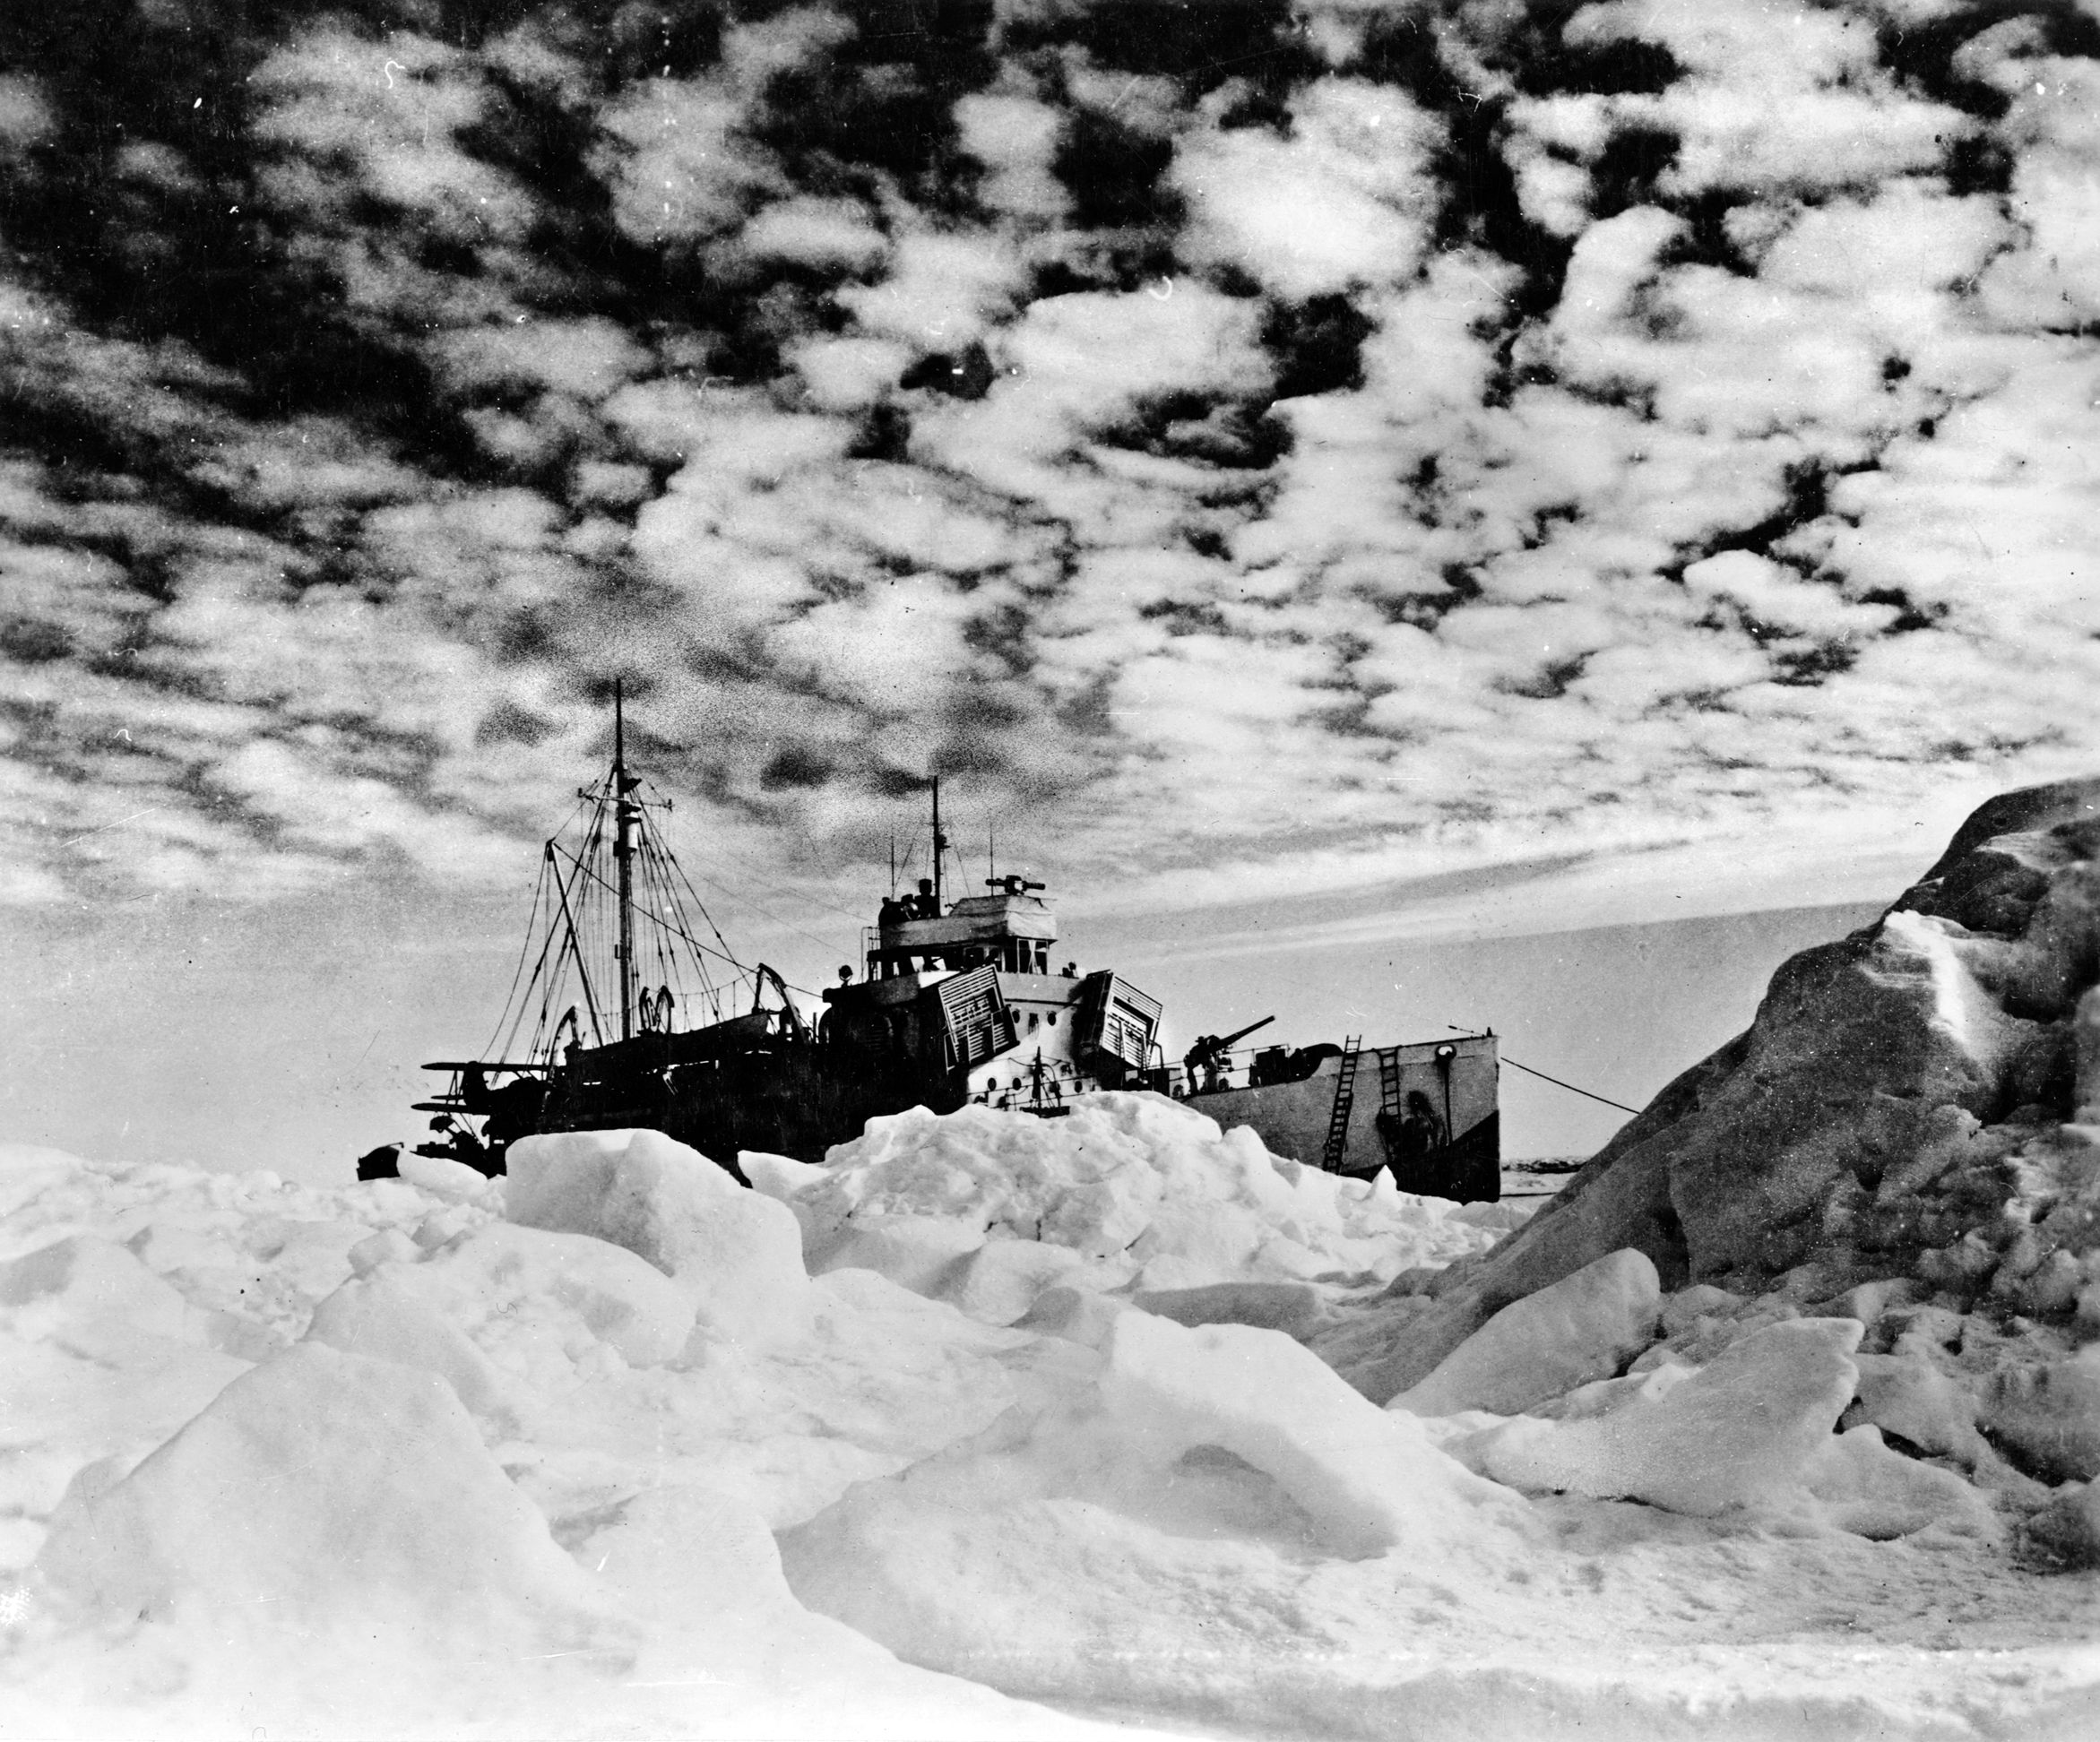 After landing a 12-man shore party that surprised three German soldiers setting up a radio station on Greenland, the Coast Guard cutter USS Northland lies at anchor amid heavy ice. Coast Guard personnel participated in action across the globe during World War II.